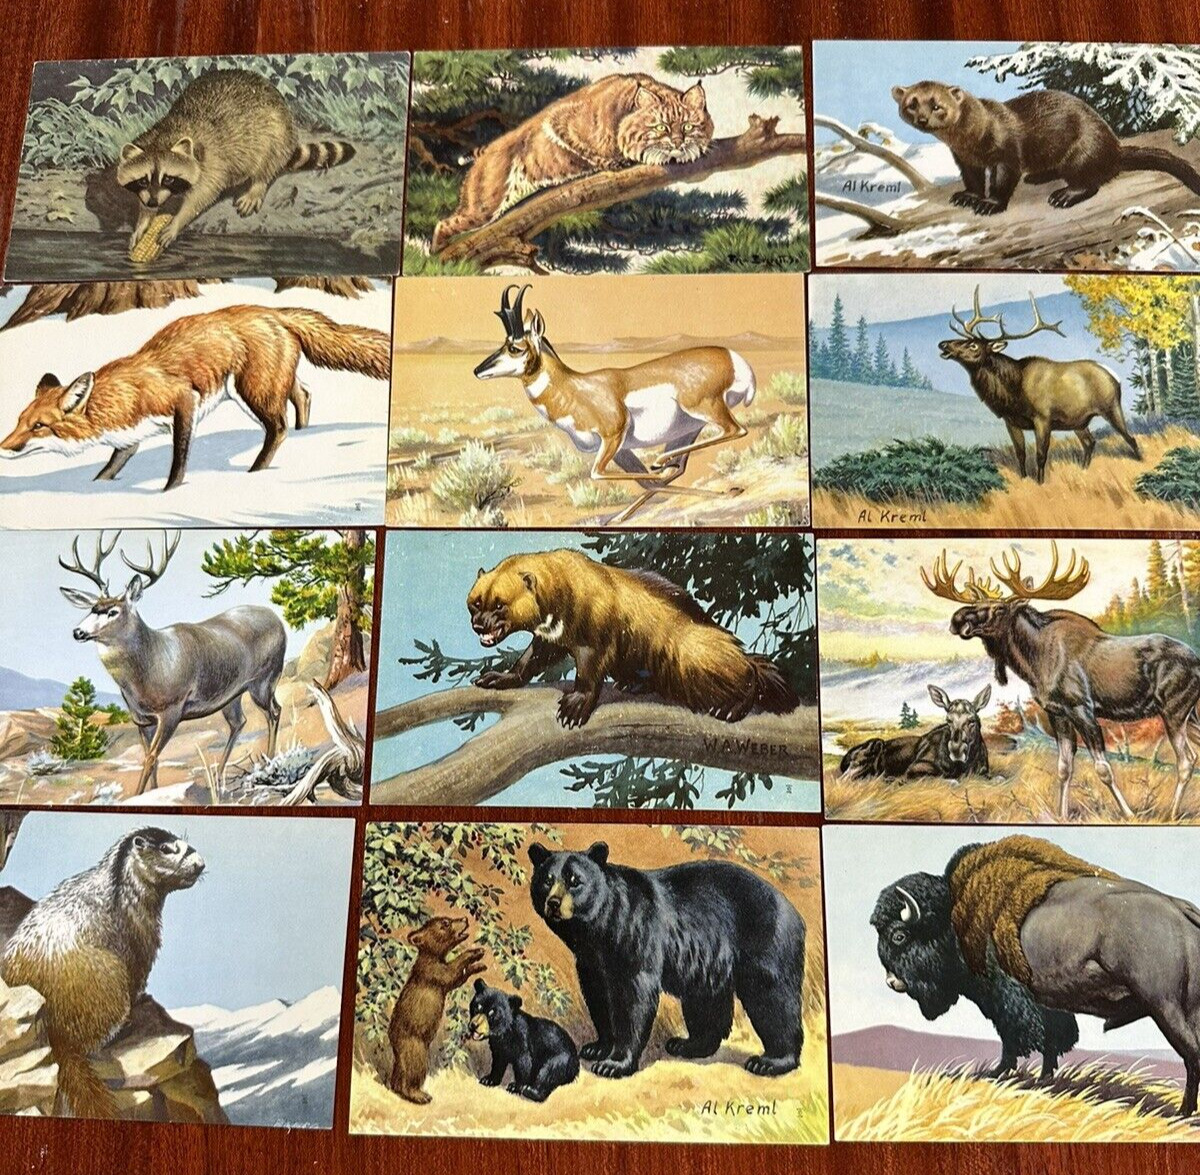 LOT of 12 Vintage 1958 National Wildlife Federation Postcards Unsent Made in USA